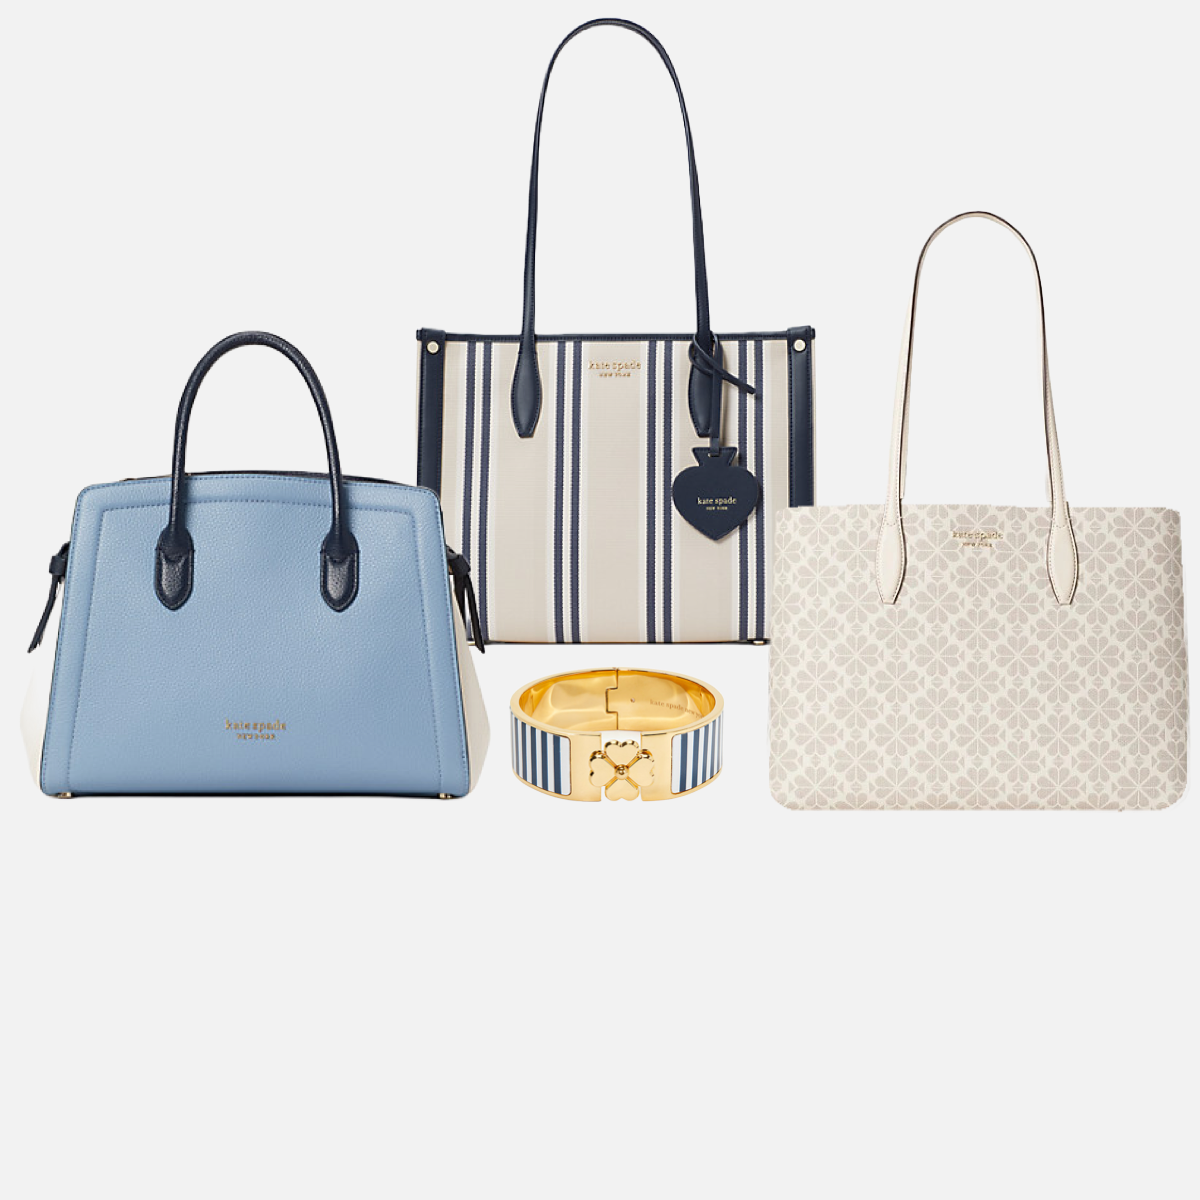 Kate Spade extra 40% off sale: Best deals to shop for fall